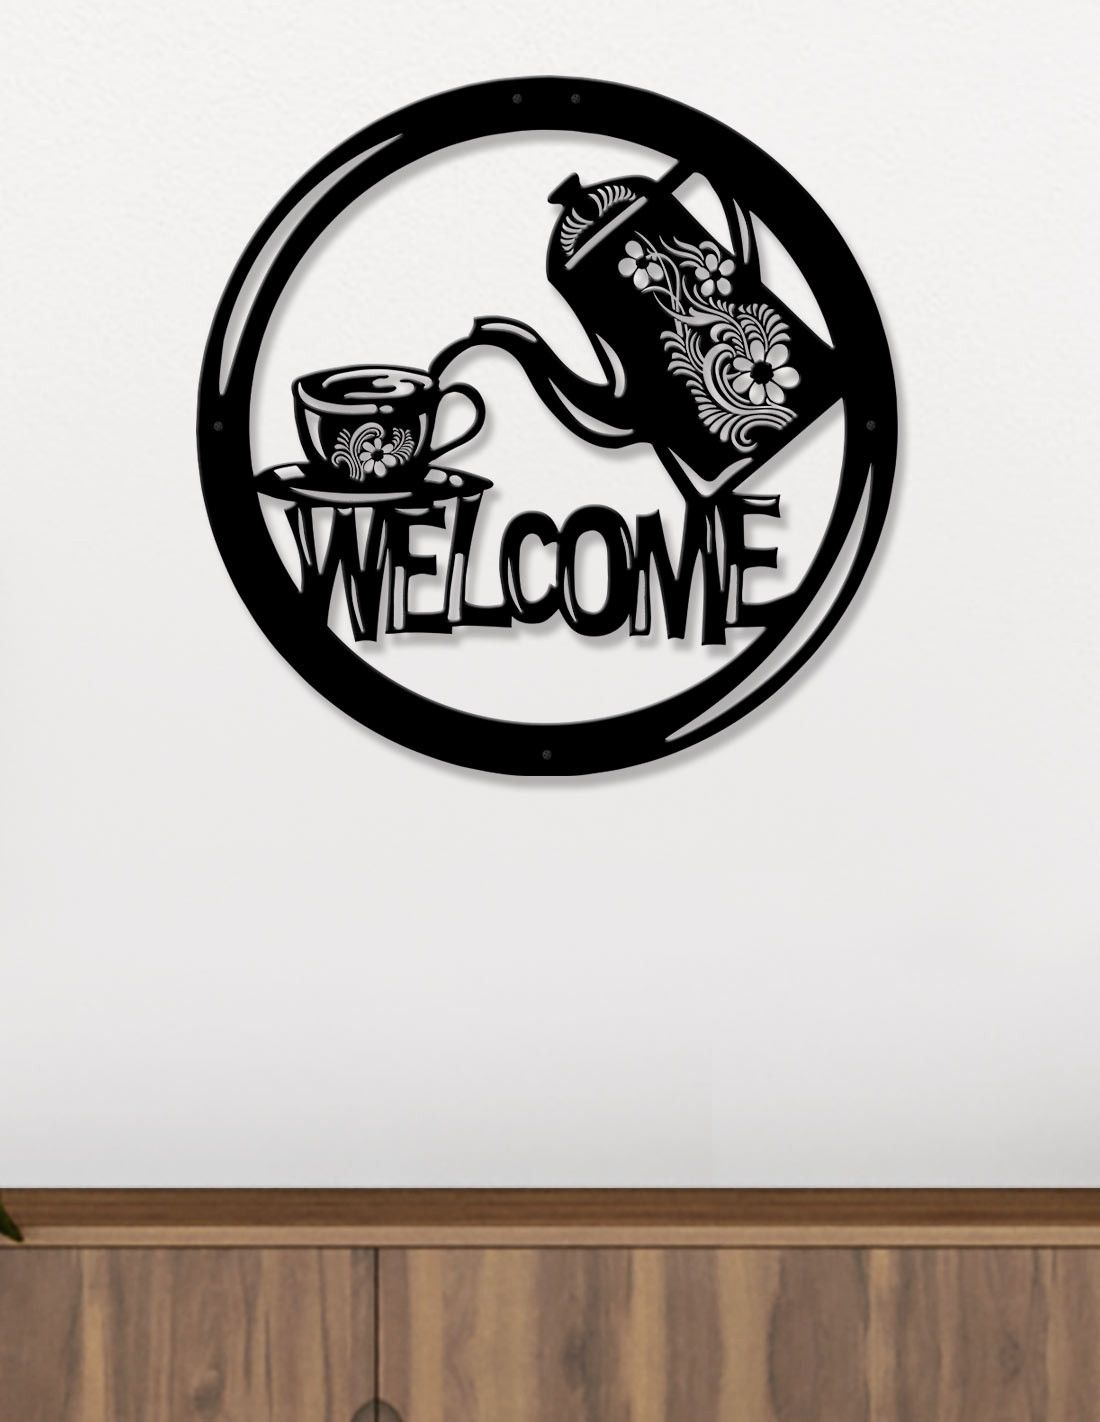 Vinoxo Vintage Metal Welcome Cafe Wall Hanging Art Decor Within 2017 Vintage Metal Welcome Sign Wall Art (View 5 of 20)